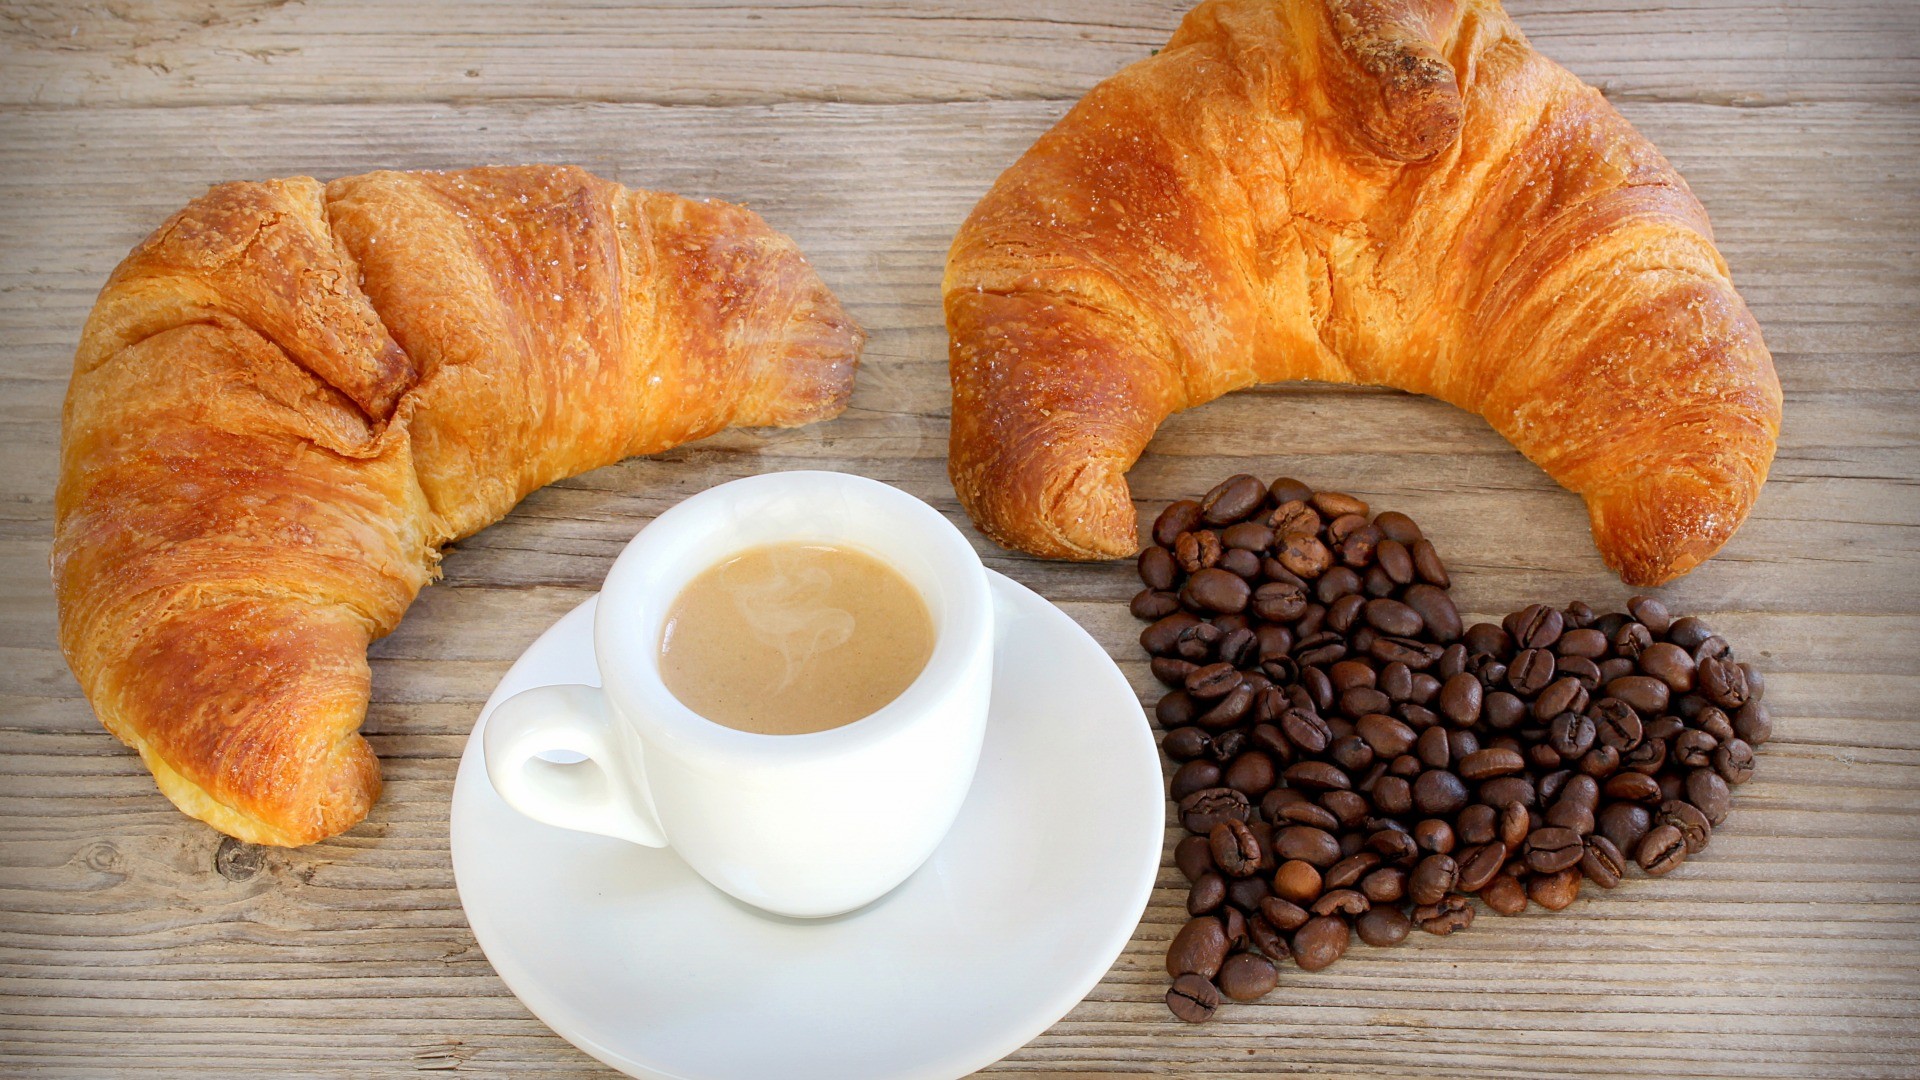 General 1920x1080 food coffee coffee beans croissants Heart (Food) cup